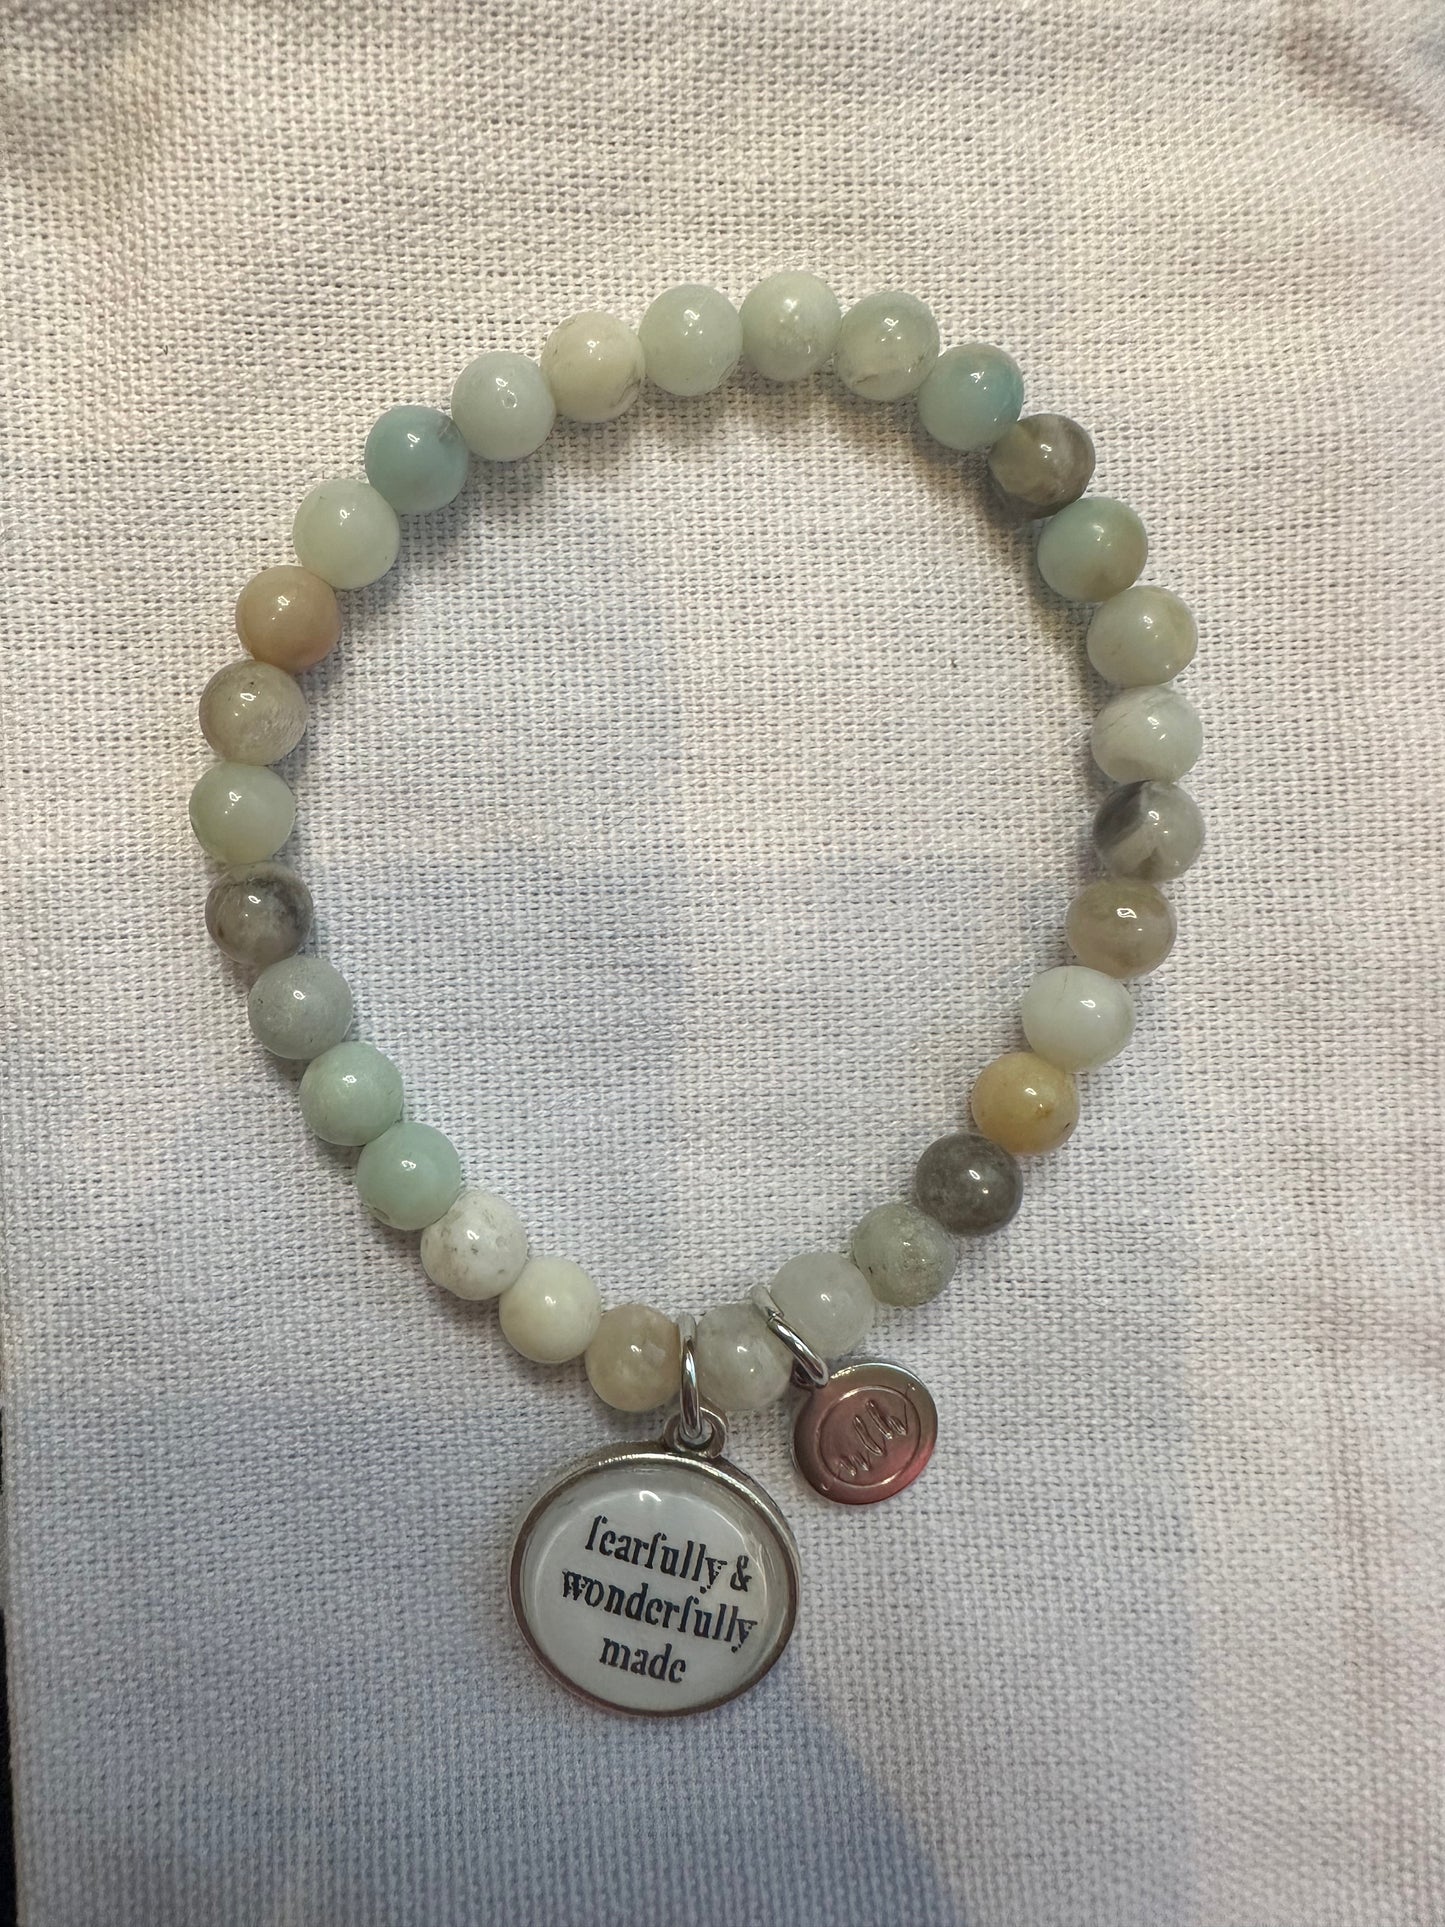 Sentiment Bracelet- fearfully and wonderfully made